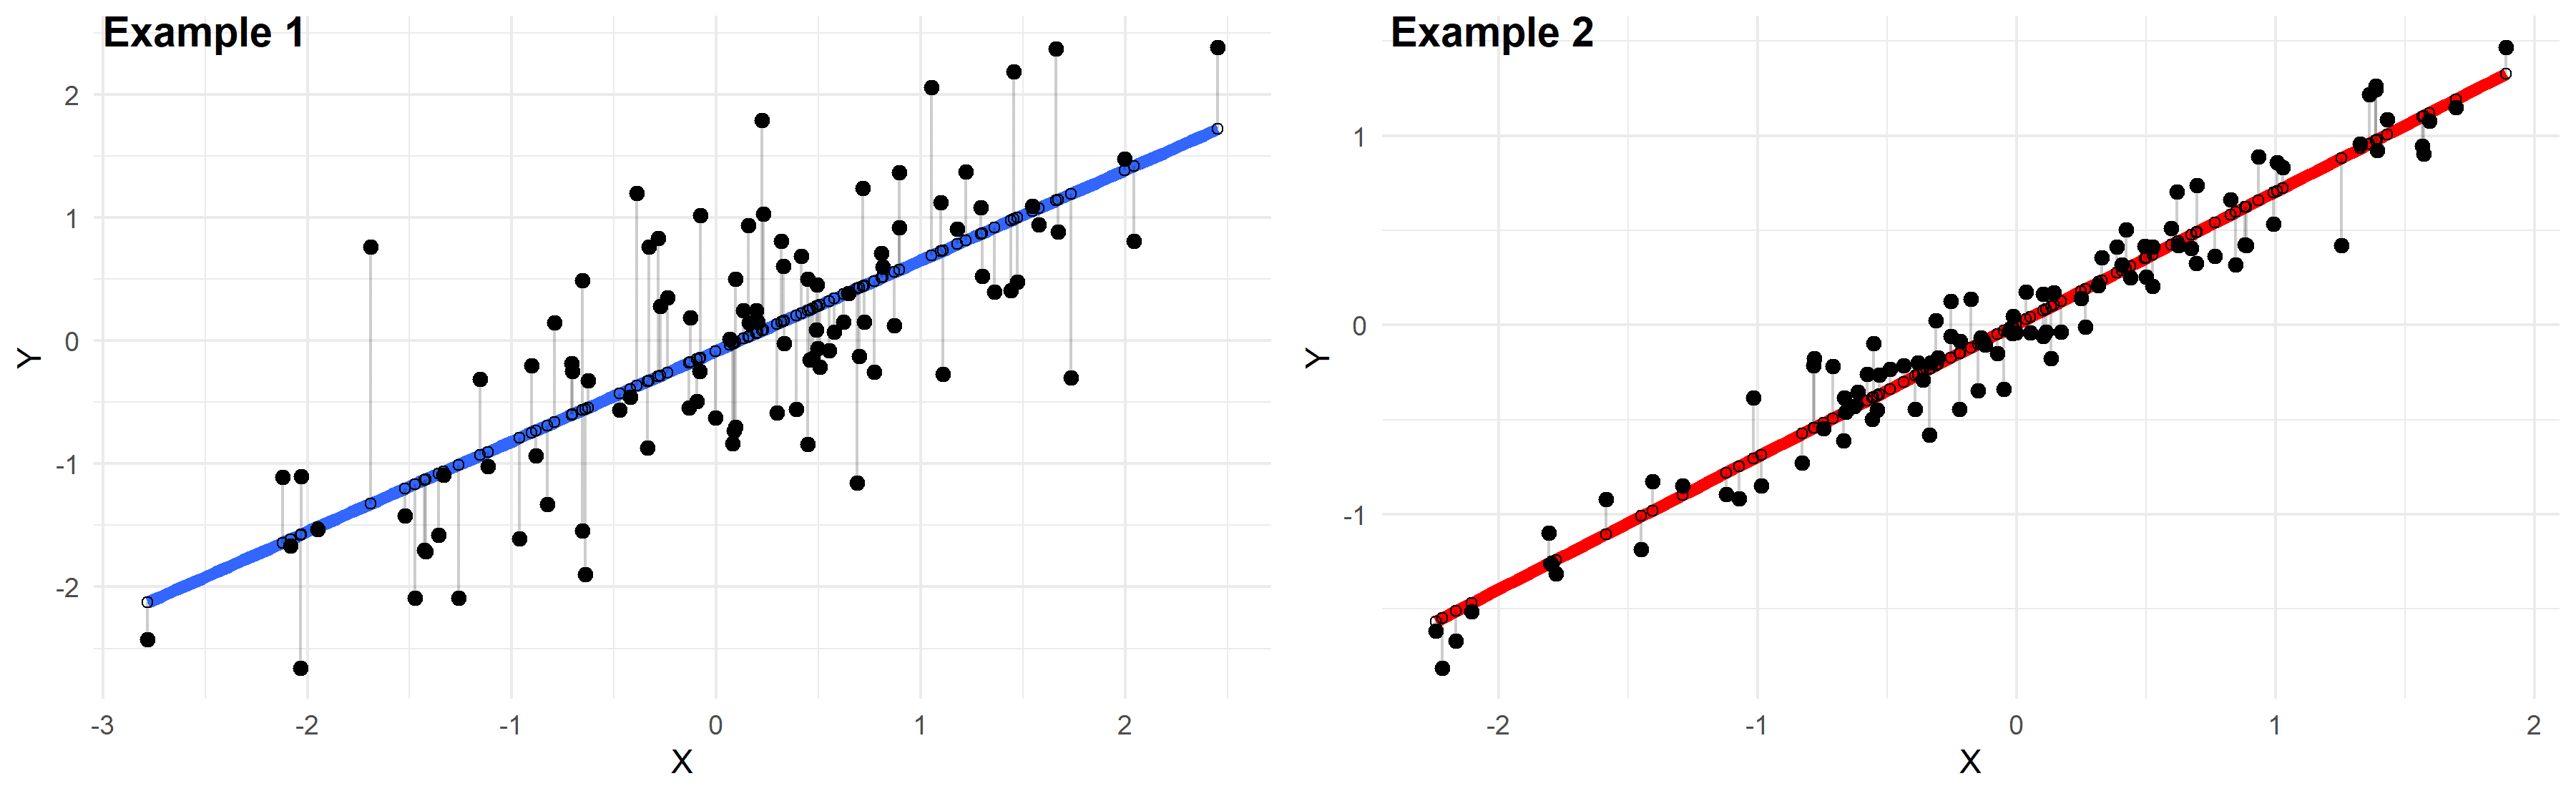 comparing the fit of 2 linear regression models